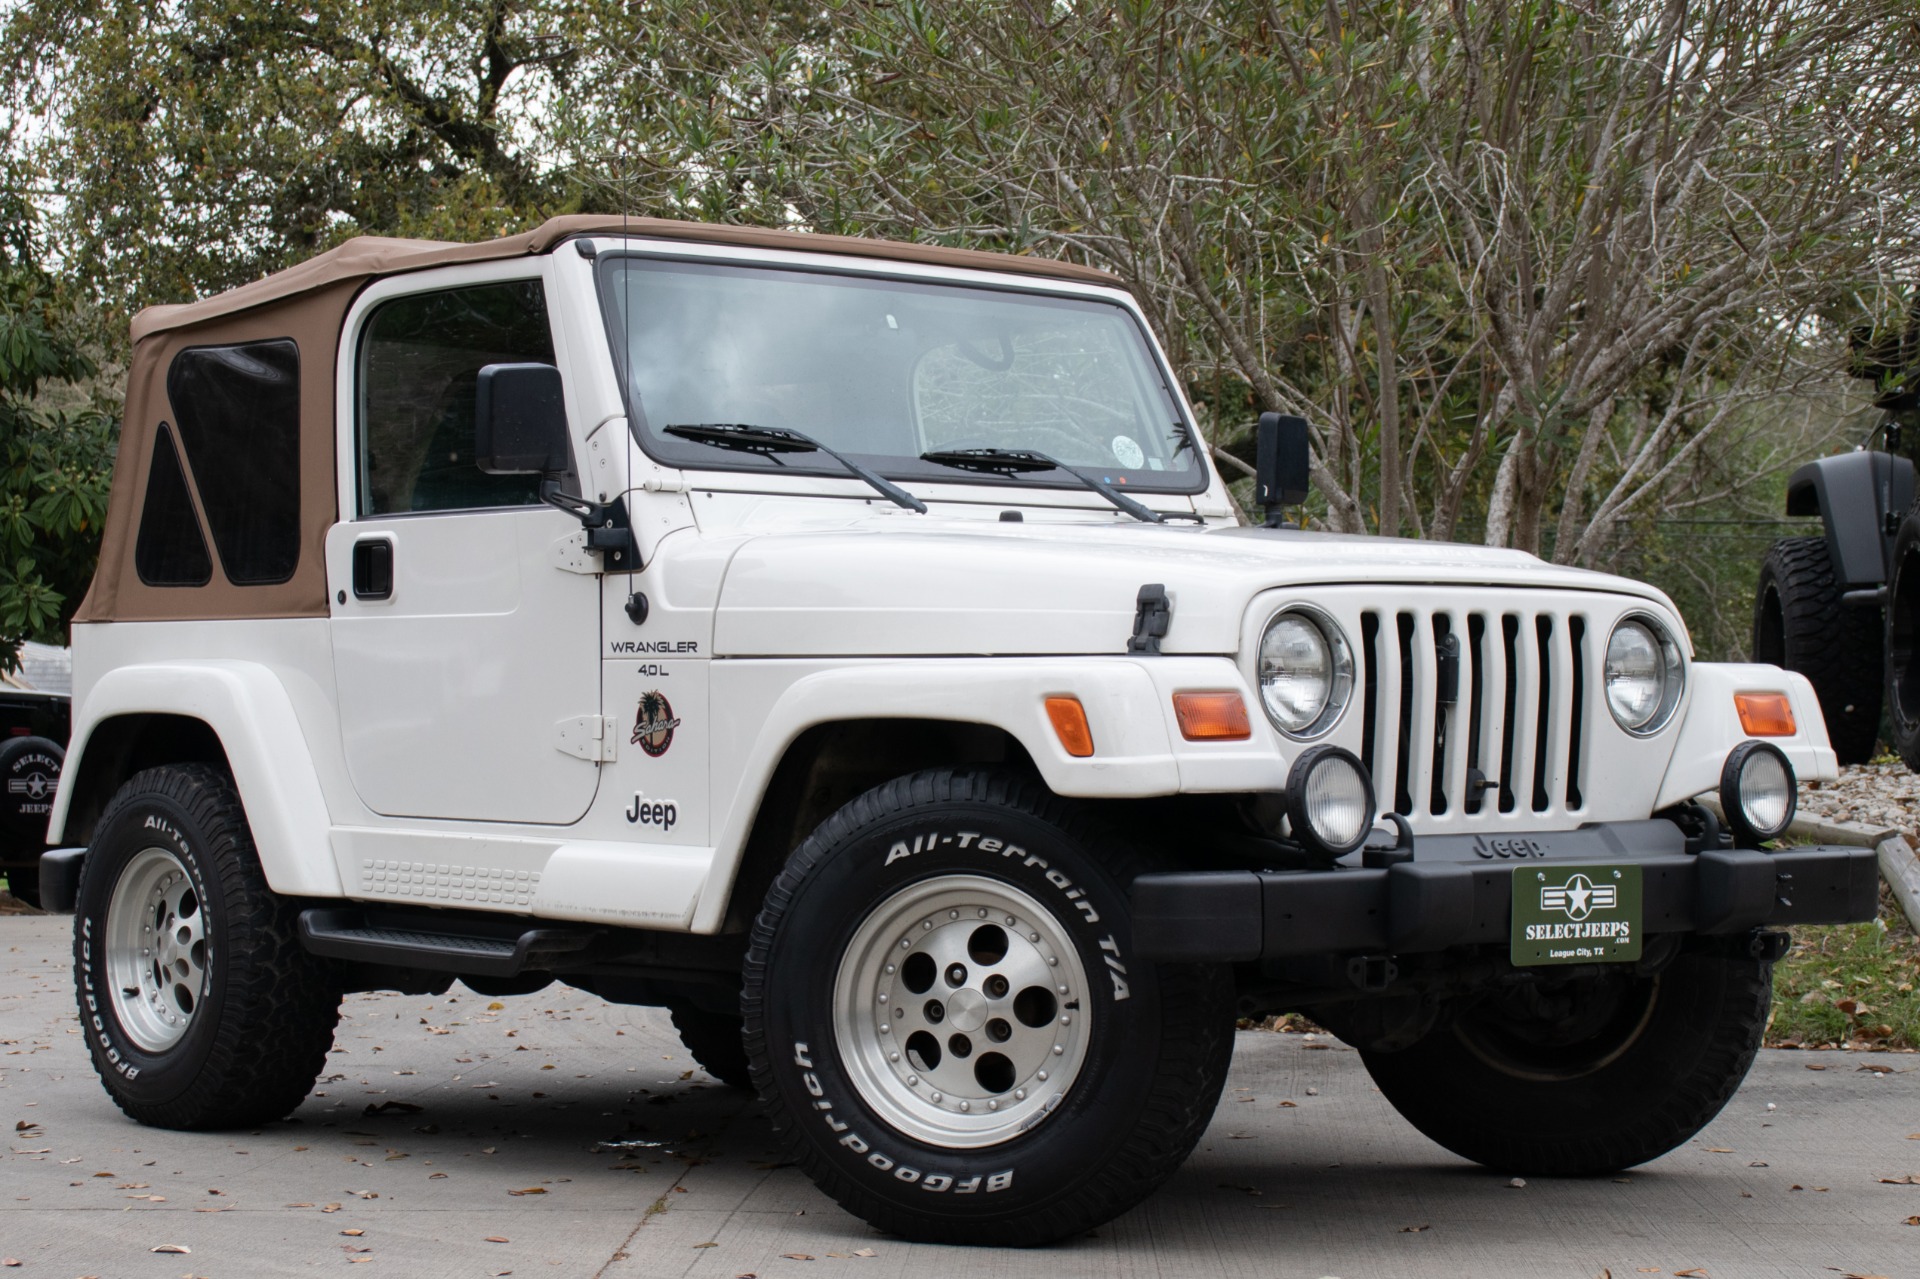 Used 1999 Jeep Wrangler Sahara For Sale (Special Pricing) | Select Jeeps  Inc. Stock #408787